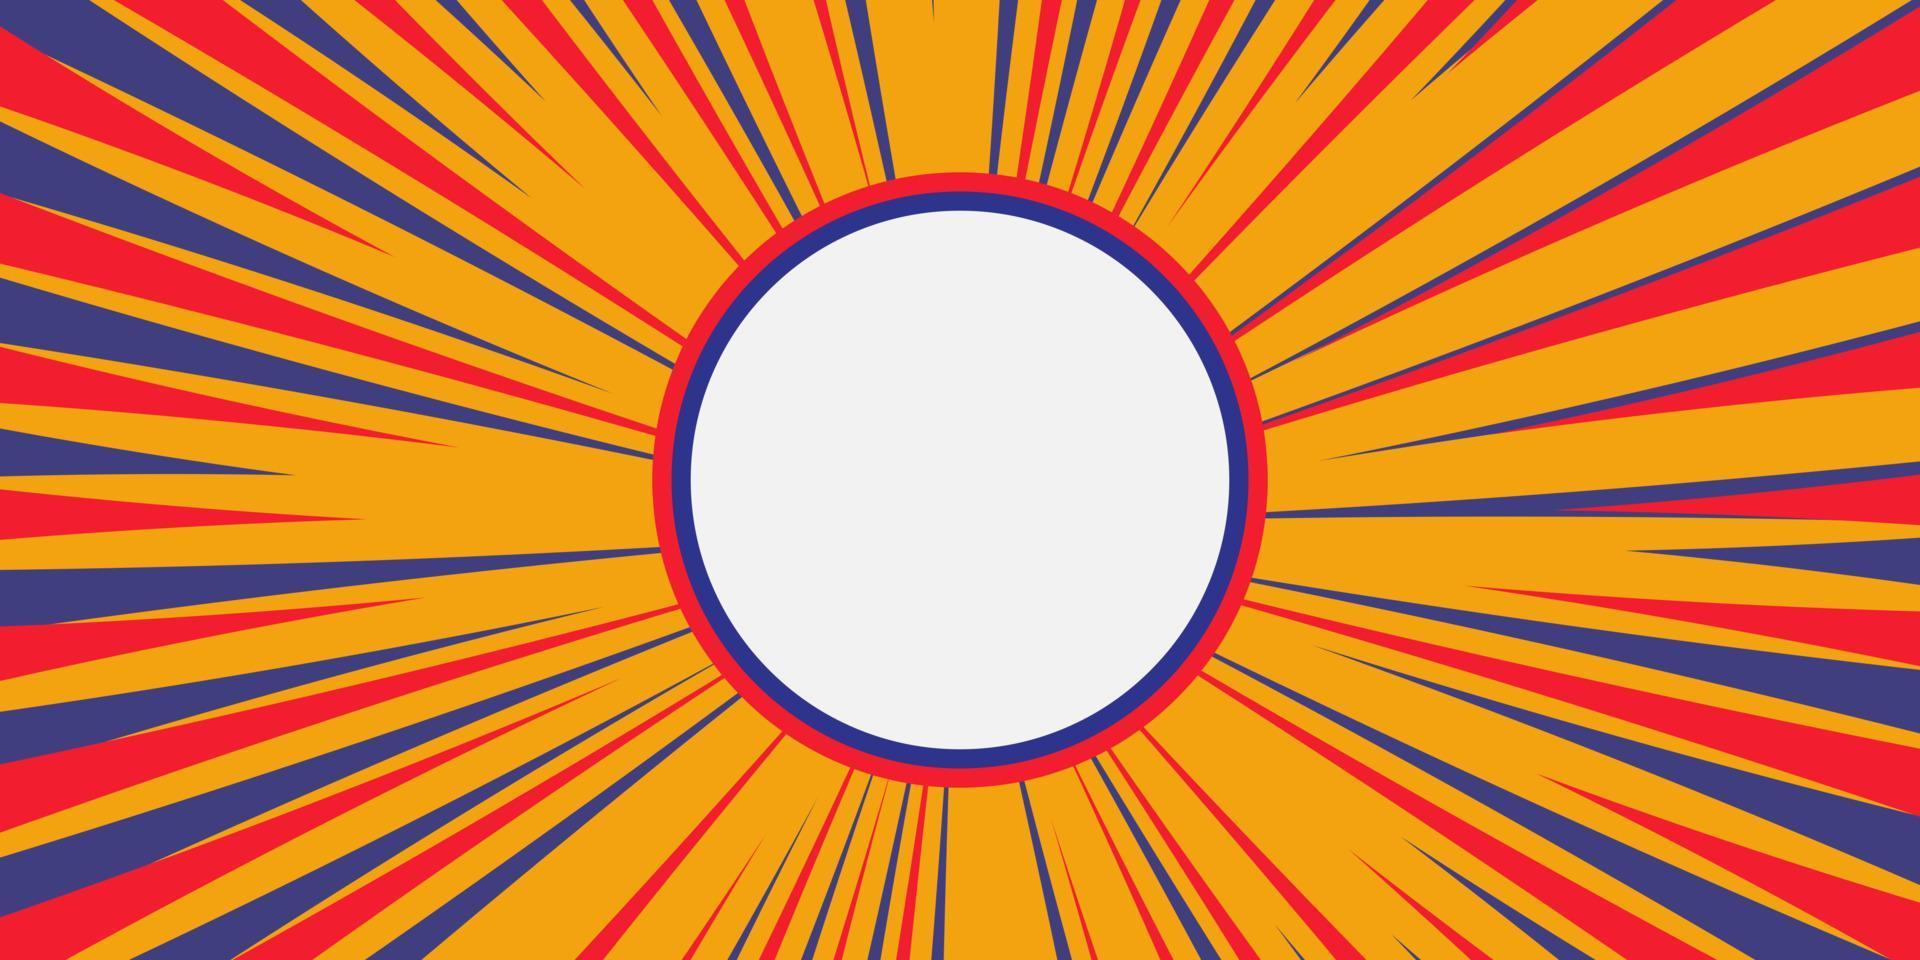 Red and blue abstract vector background with rays. vector illustration retro grunge with a white circle background. Abstract sunburst design.Vintage colorful rising sun or sun ray, sun burst retro